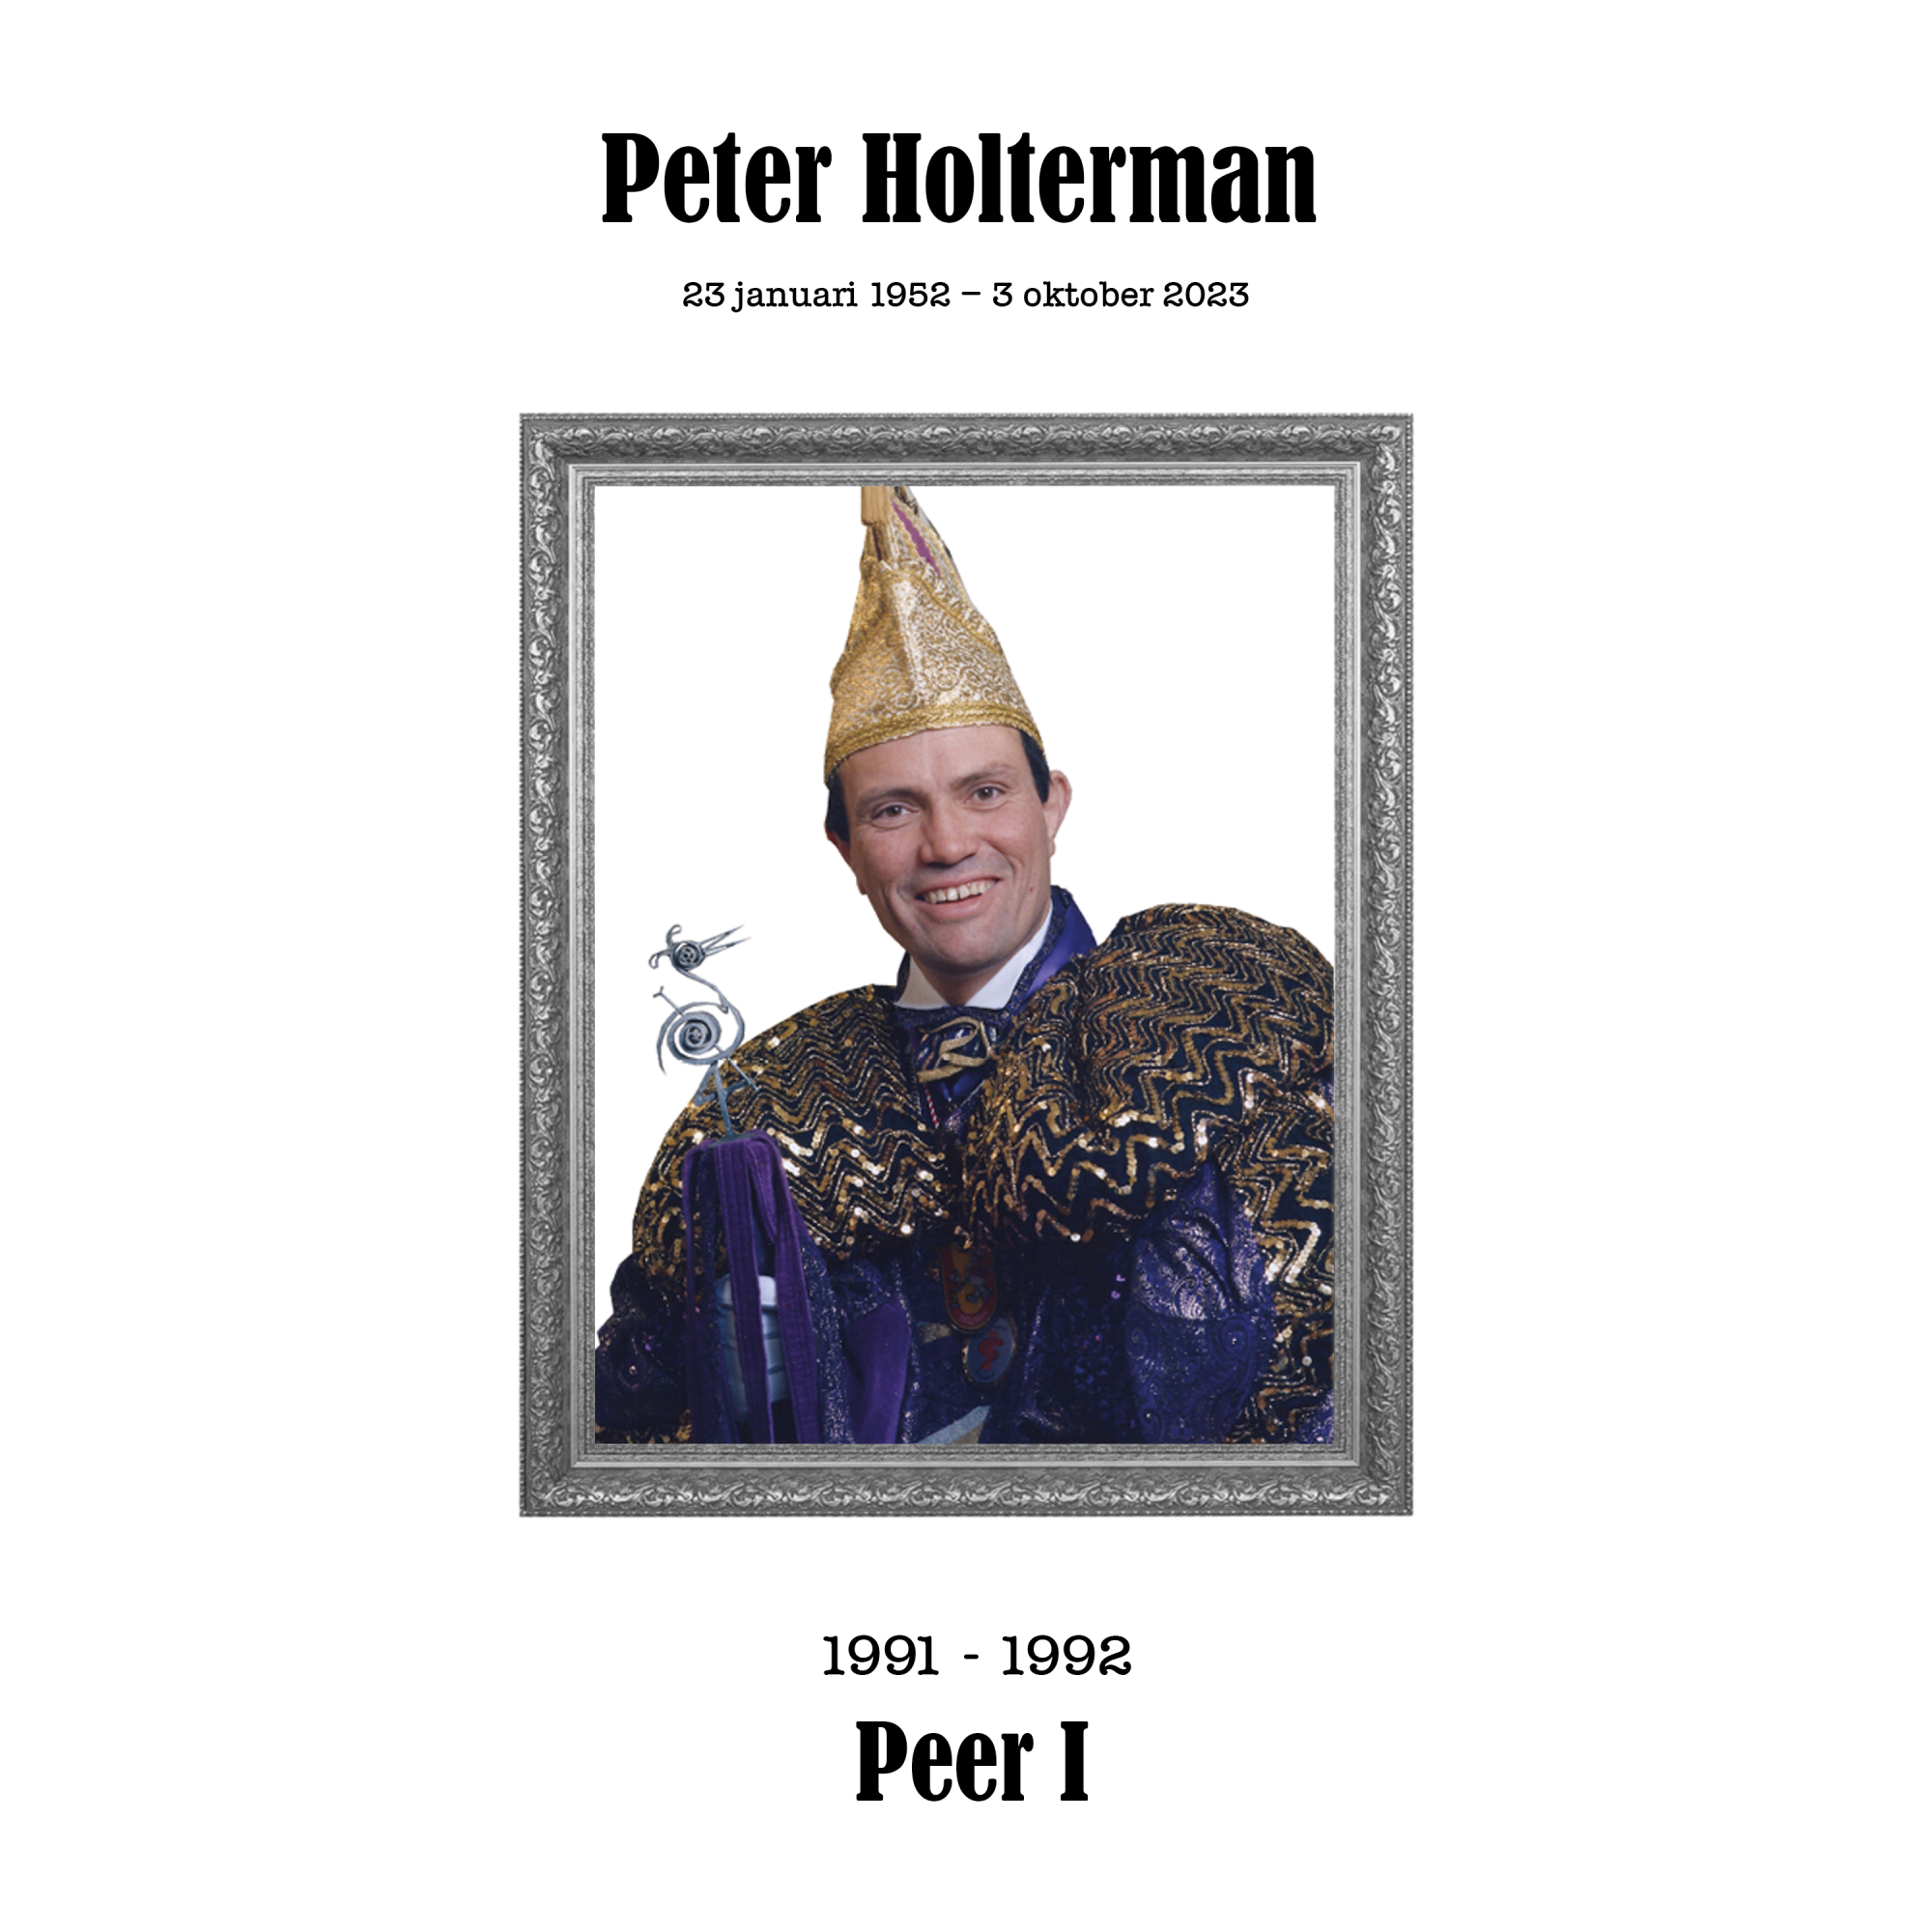 Peter Holterman